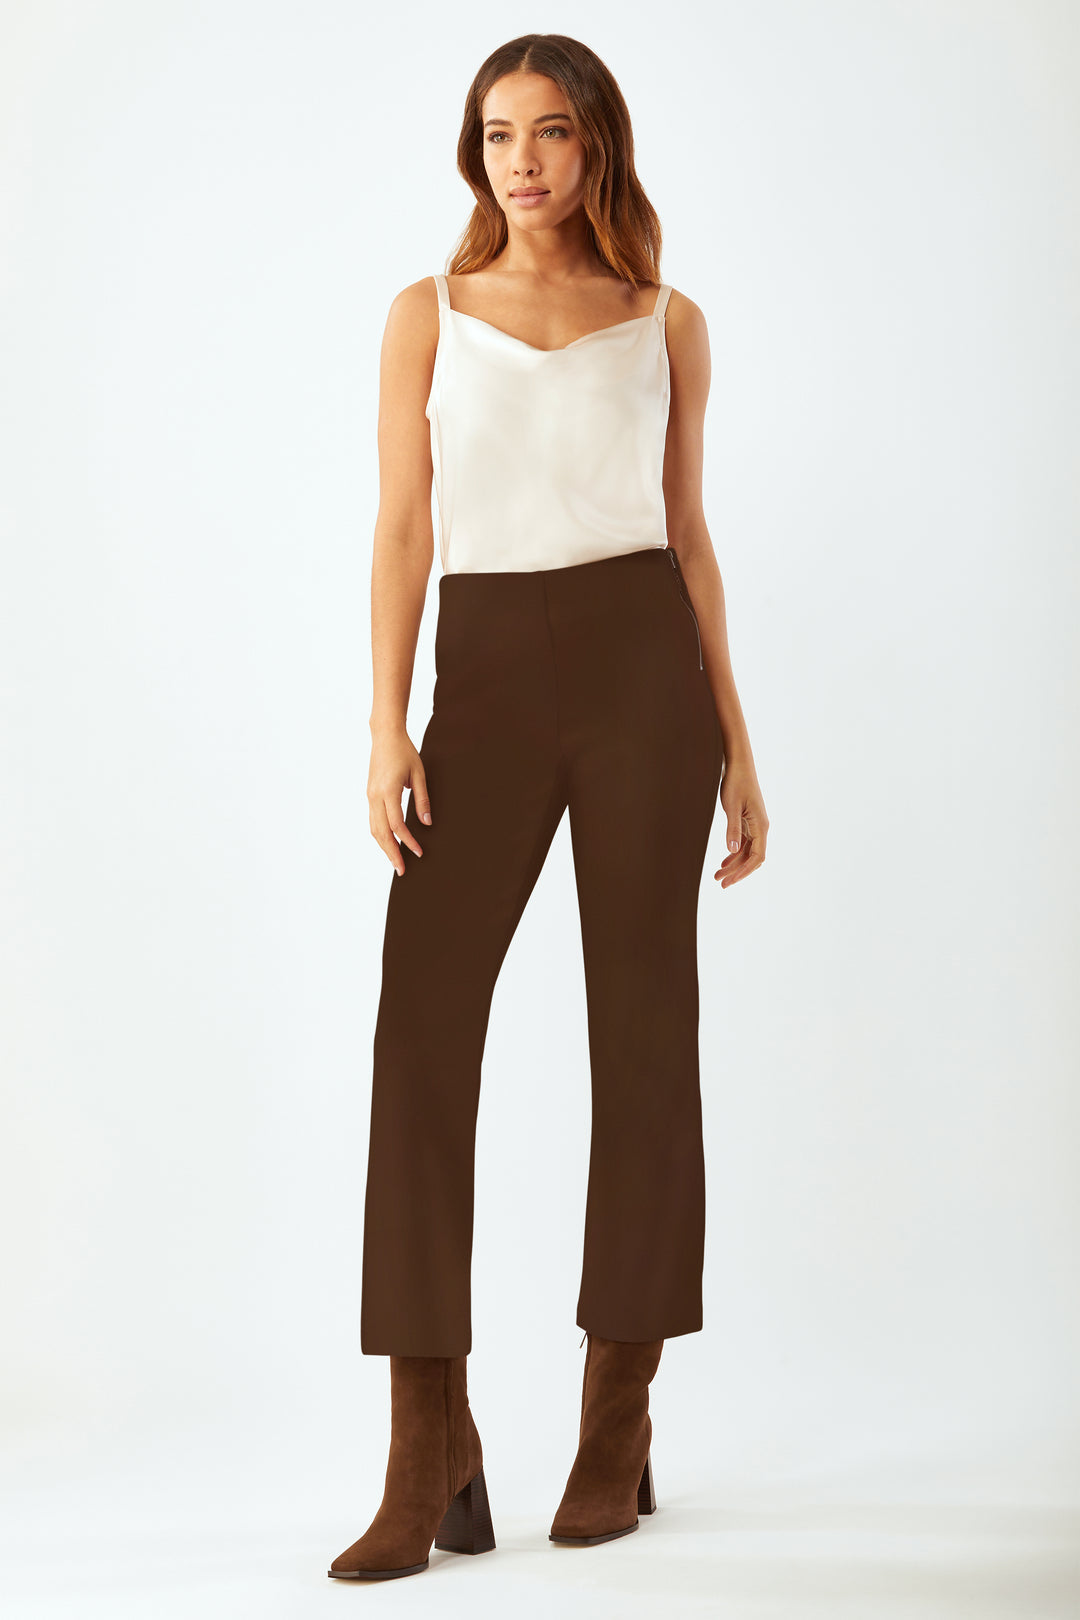 Prince Cropped Flare Pant - Chocolate